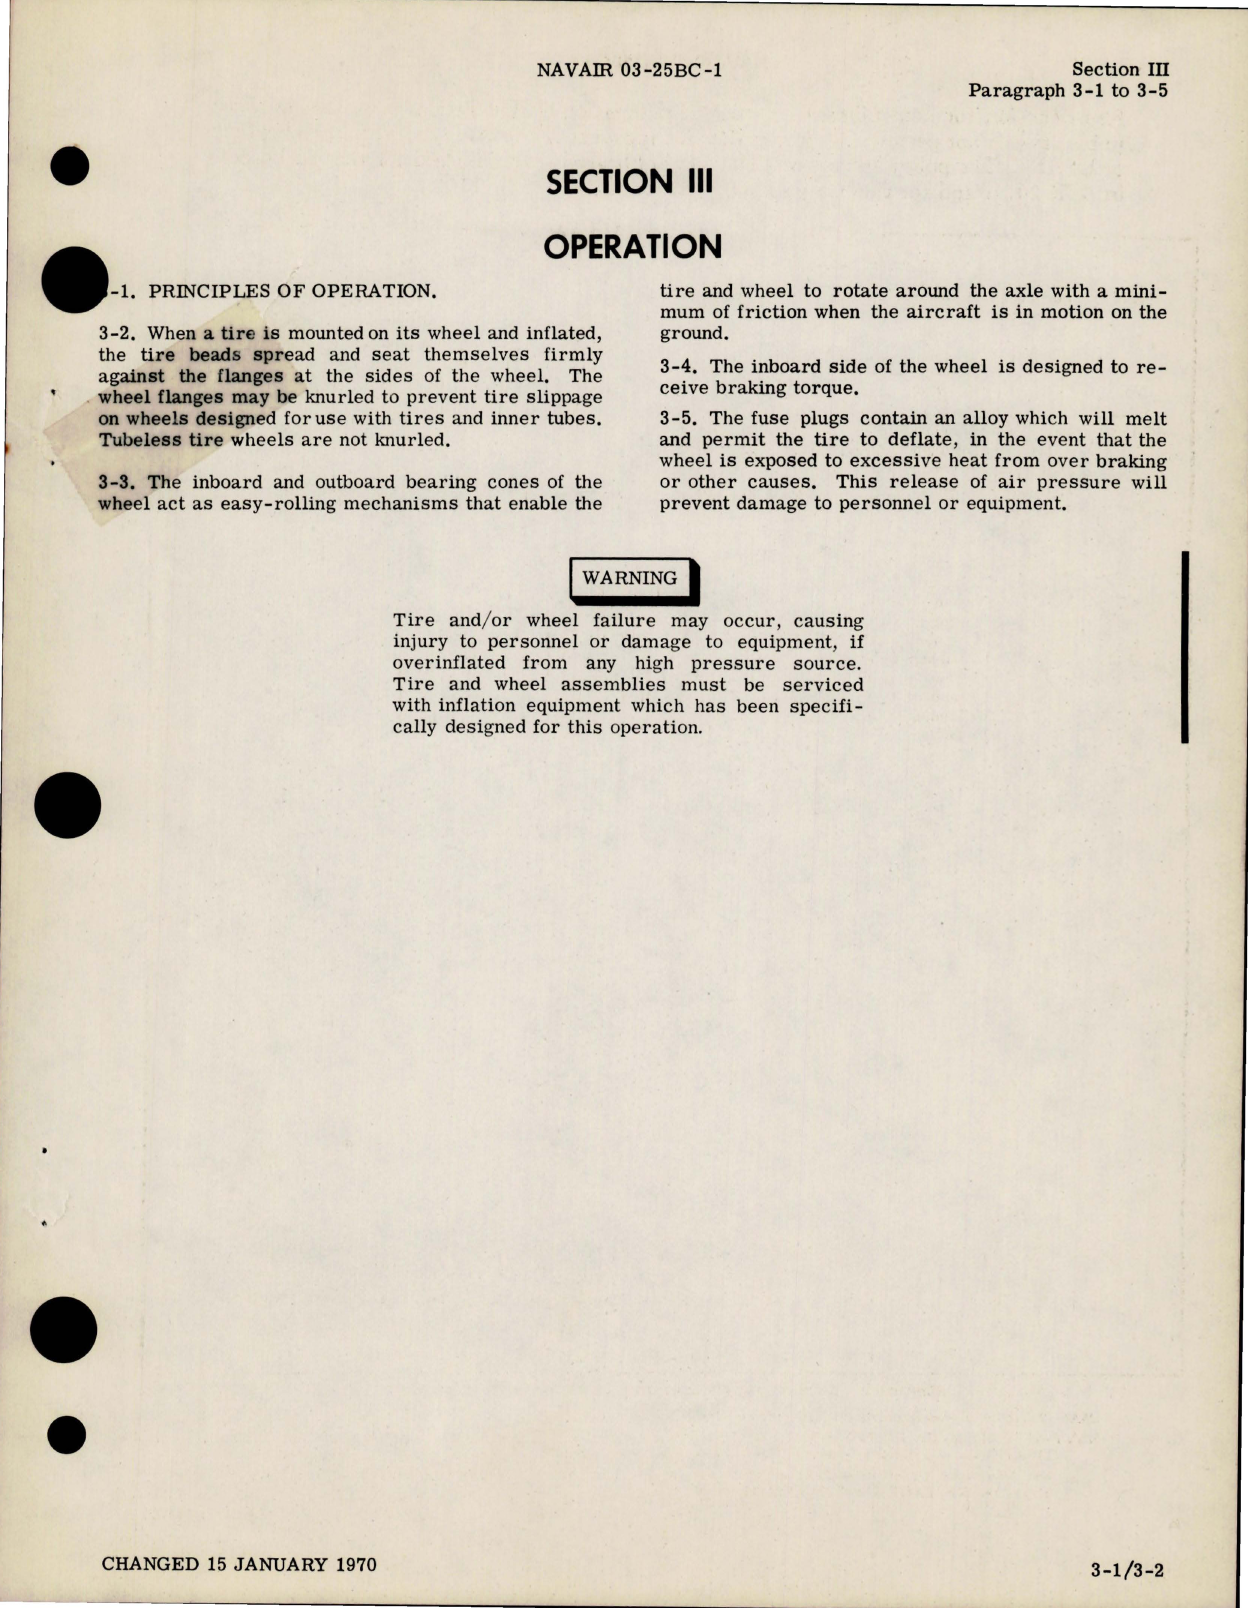 Sample page 9 from AirCorps Library document: Overhaul Instructions for Landing Wheels for use with Disc Brakes